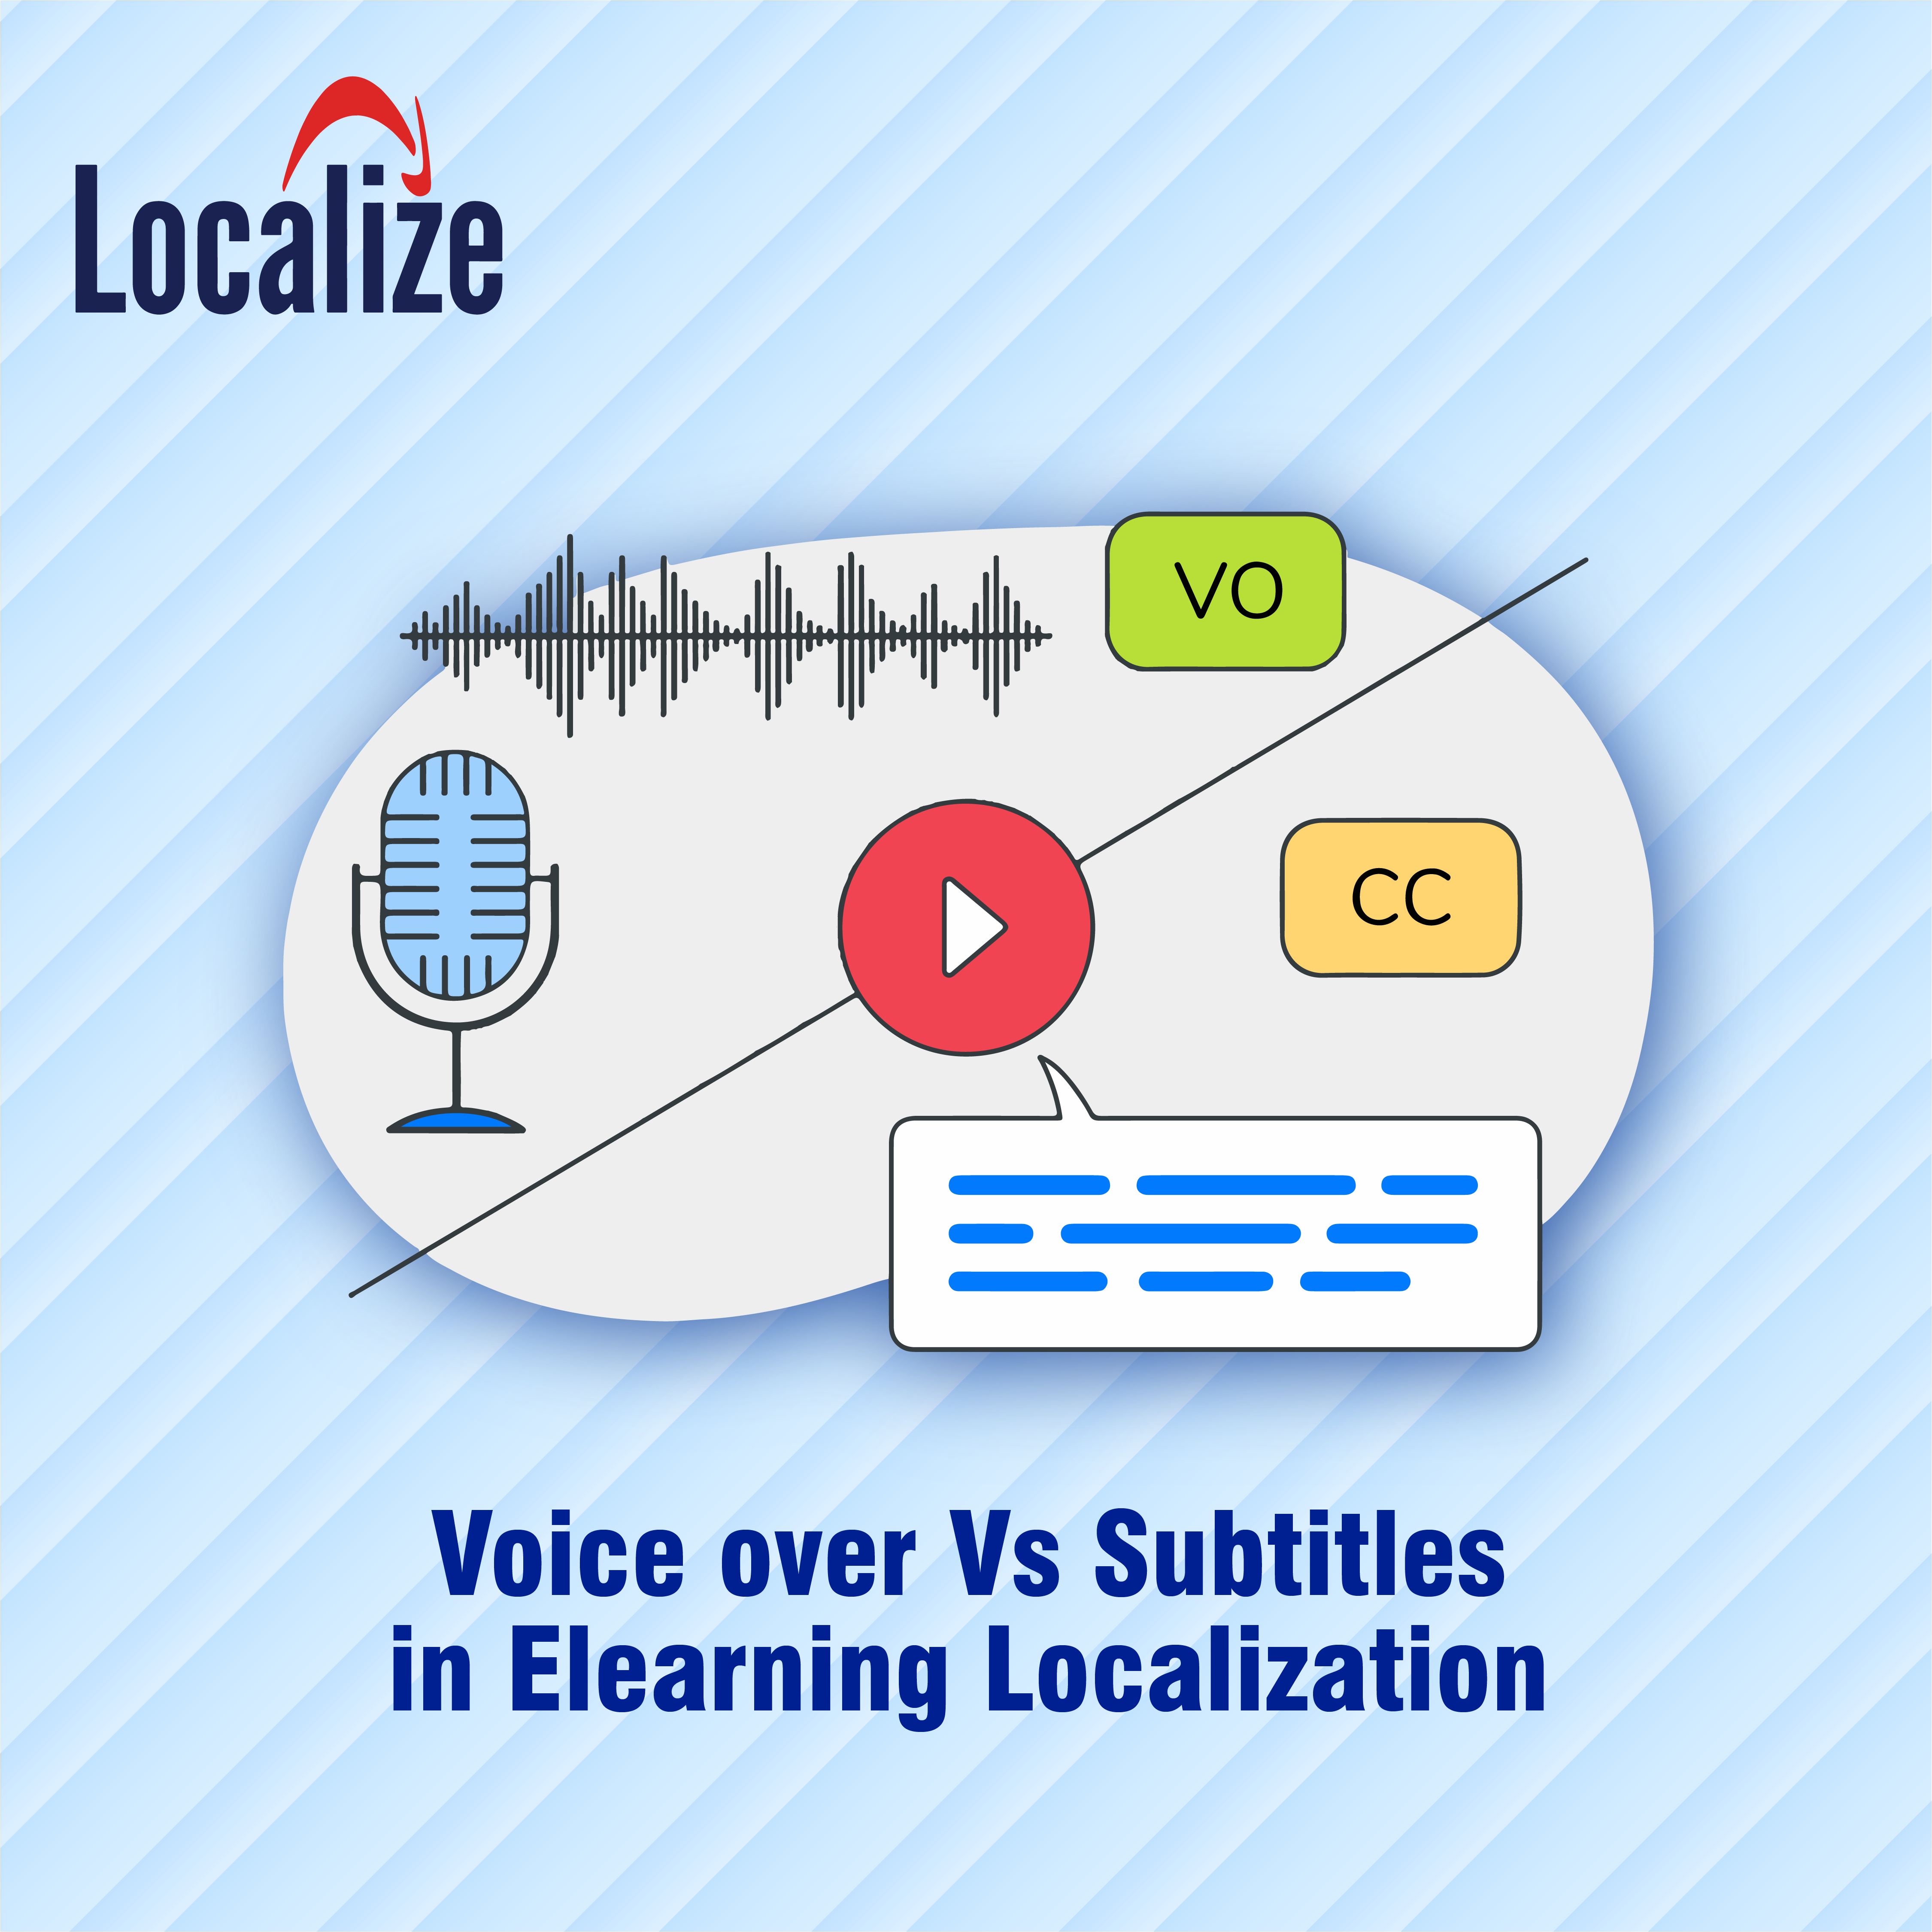 You are currently viewing Localize a2z – Voice over Vs Subtitles in Elearning Localization